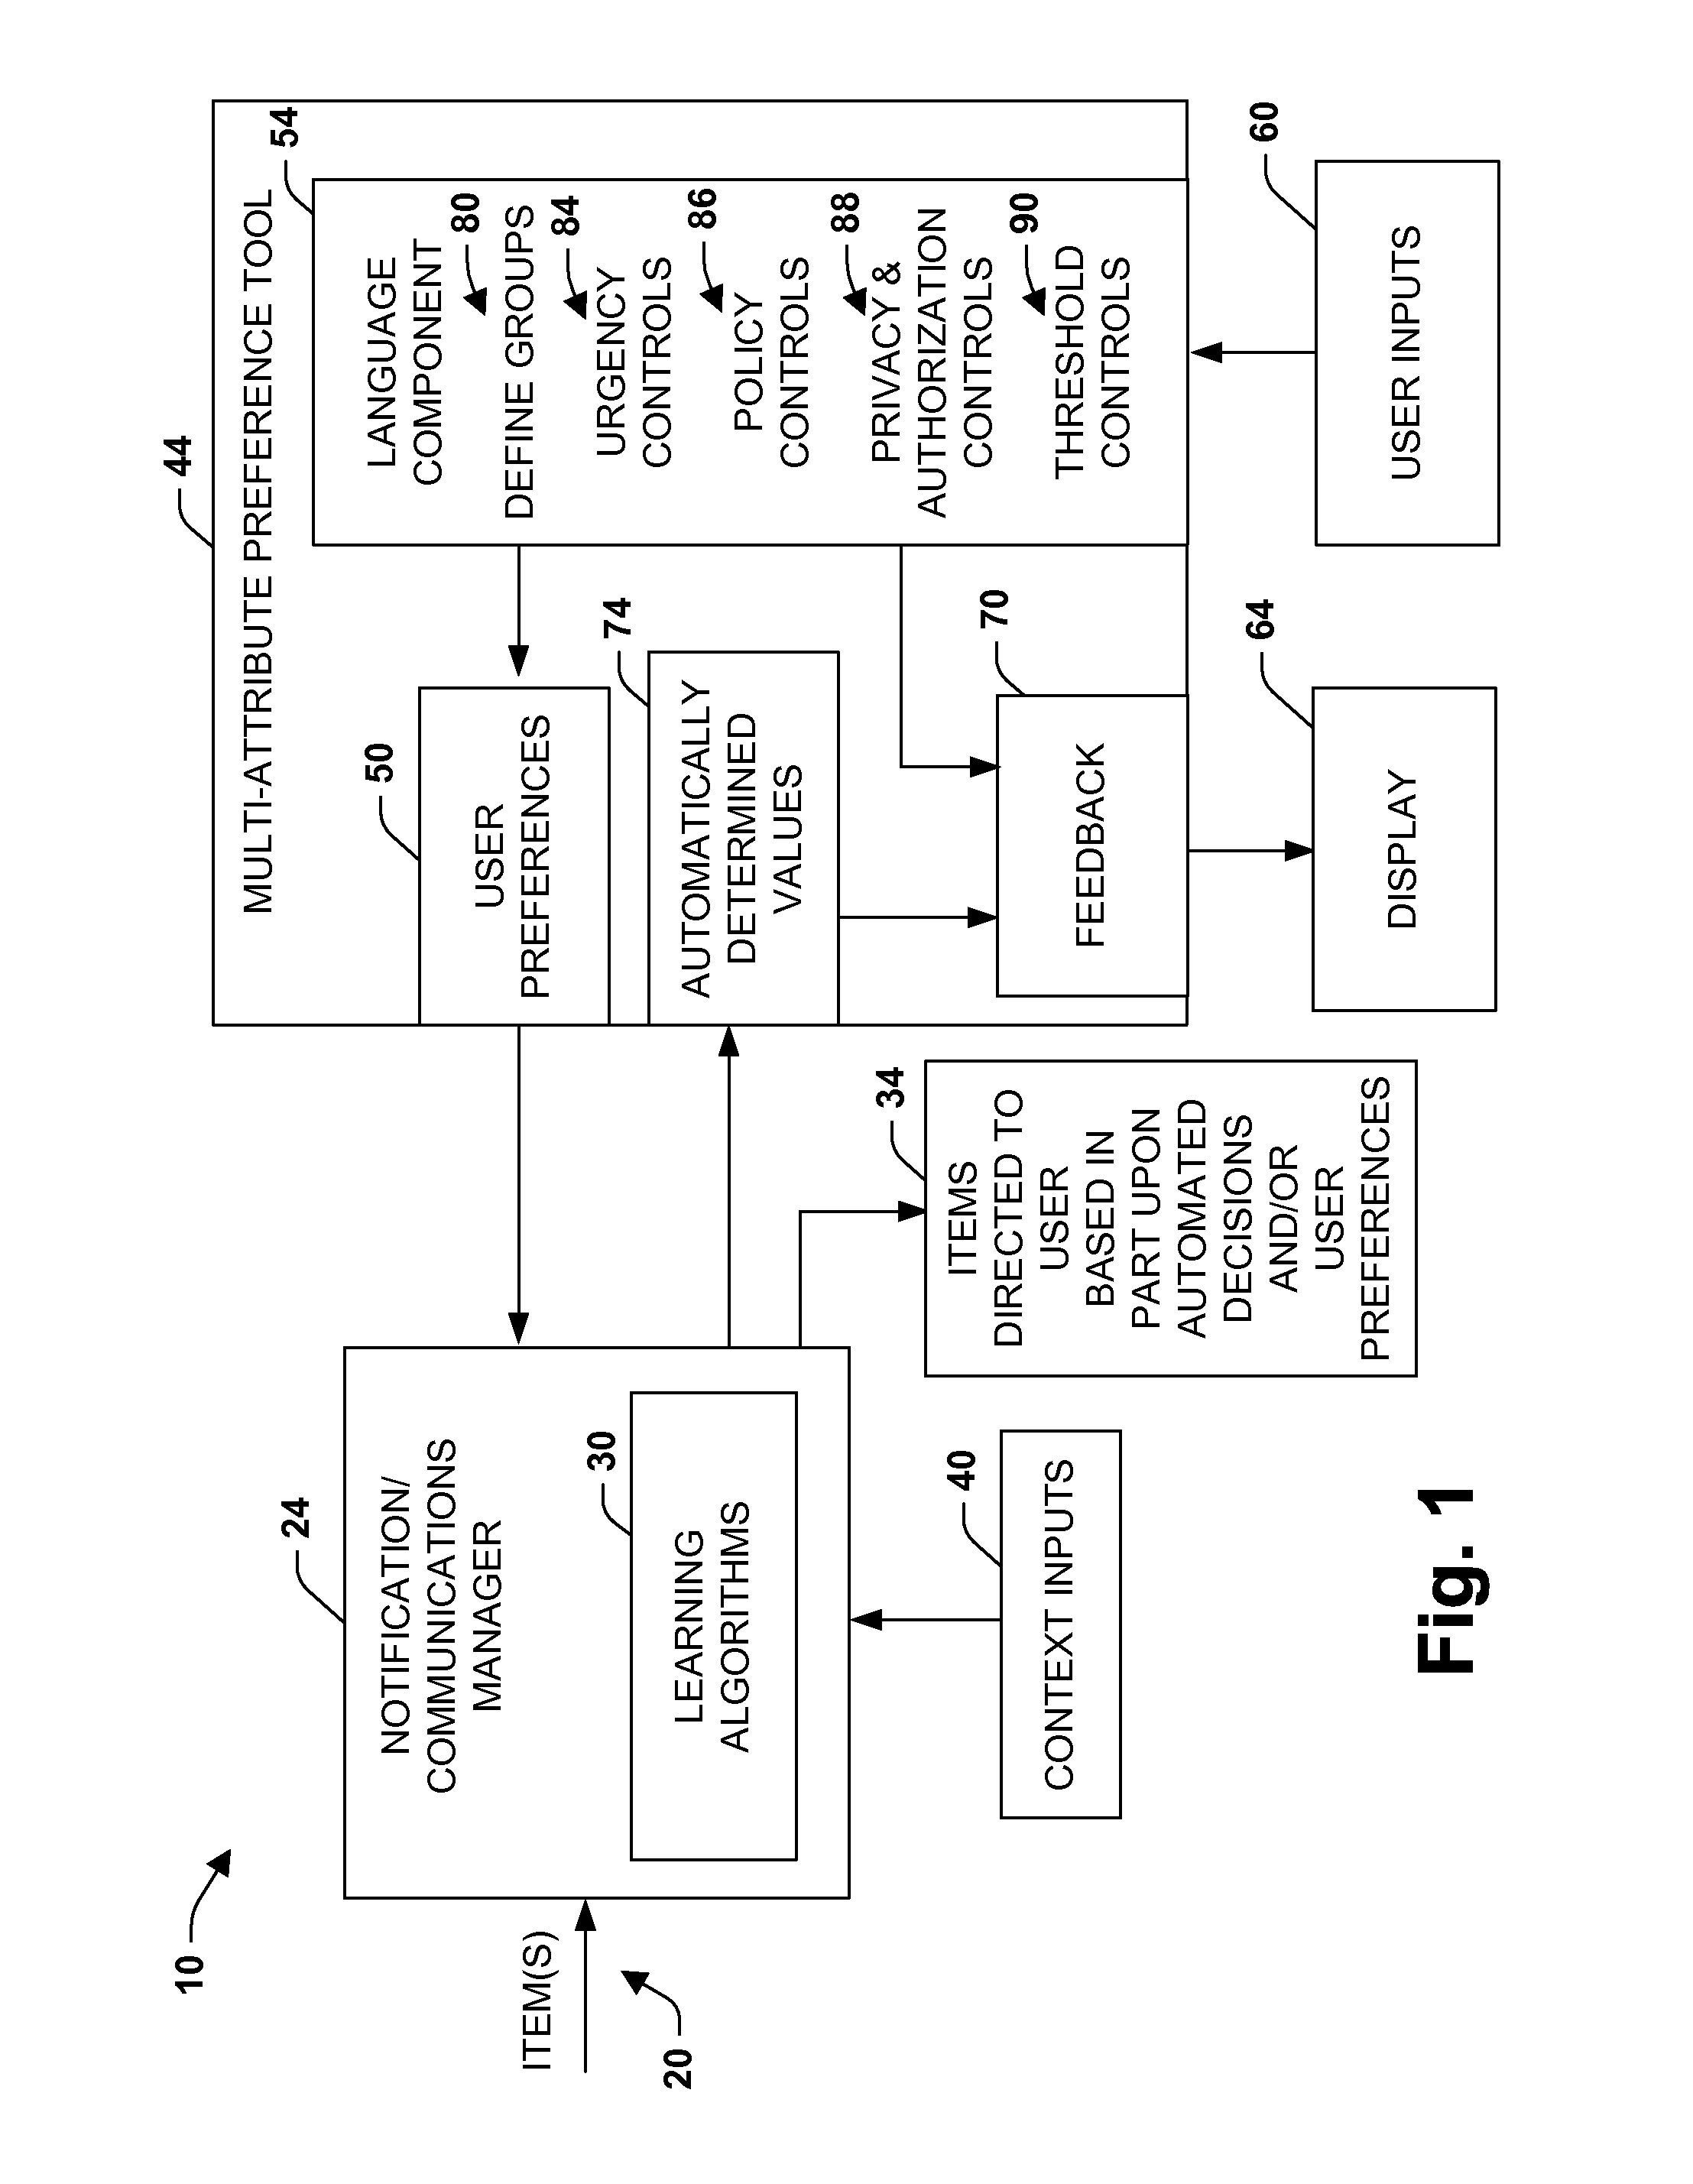 Multiattribute specification of preferences about people, priorities, and privacy for guiding messaging and communications